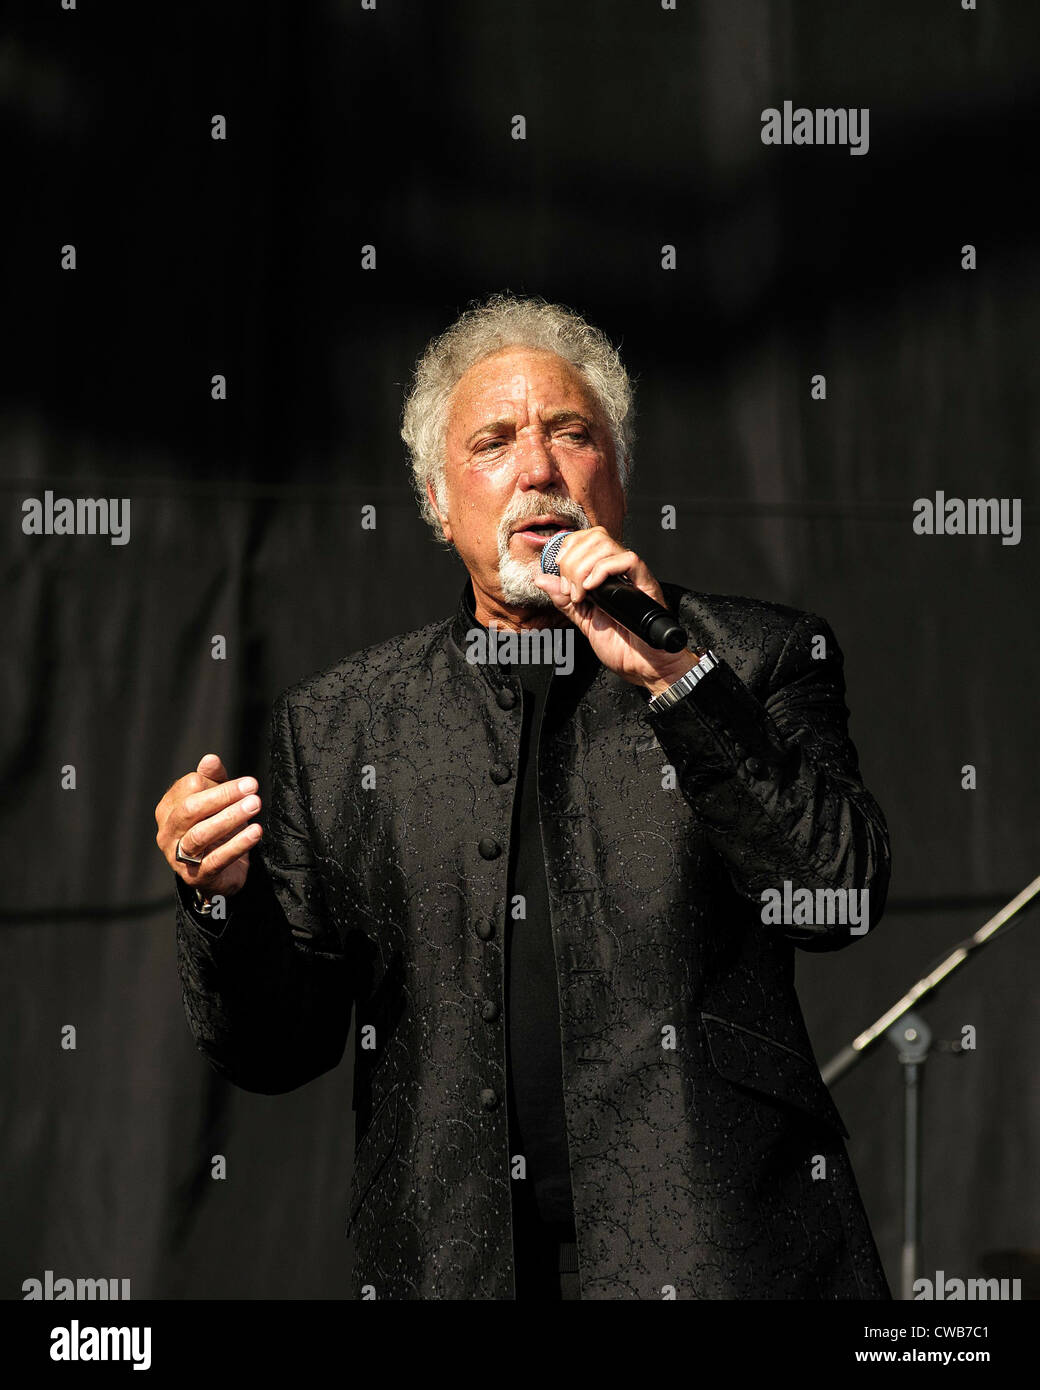 Sir Tom Jones plays V Festival on 19/08/2012 at Hylands Park, Chelmsford. Persons pictured: Sir Tom Jones. Picture by Julie Edwards Stock Photo